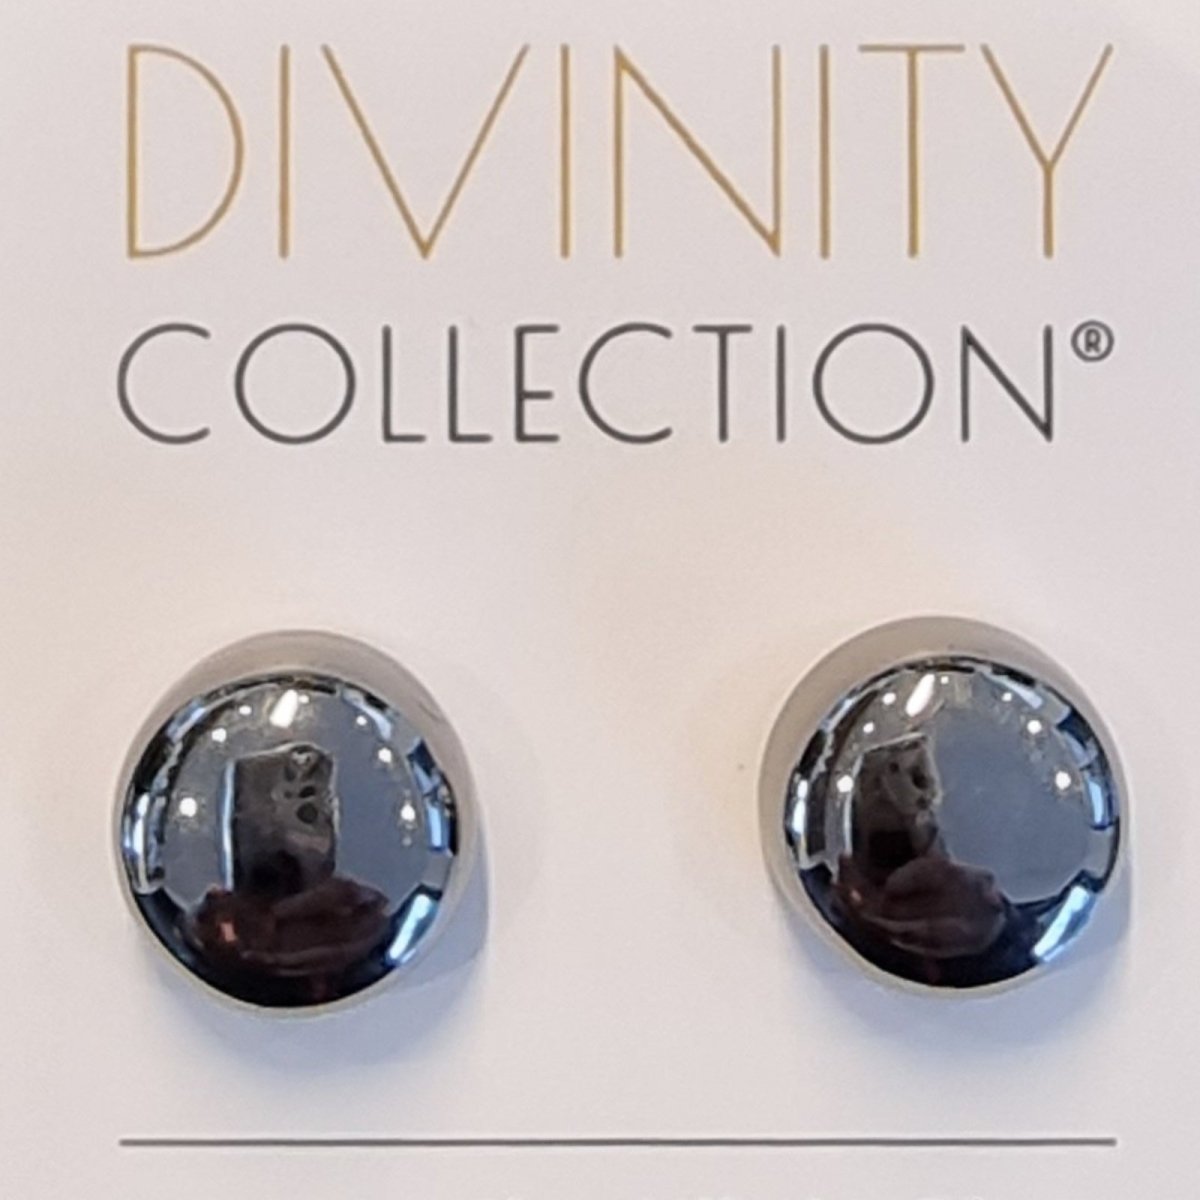 2 Pairs Magnetic Hijab Metallic Pins - Black - Divinity Collection